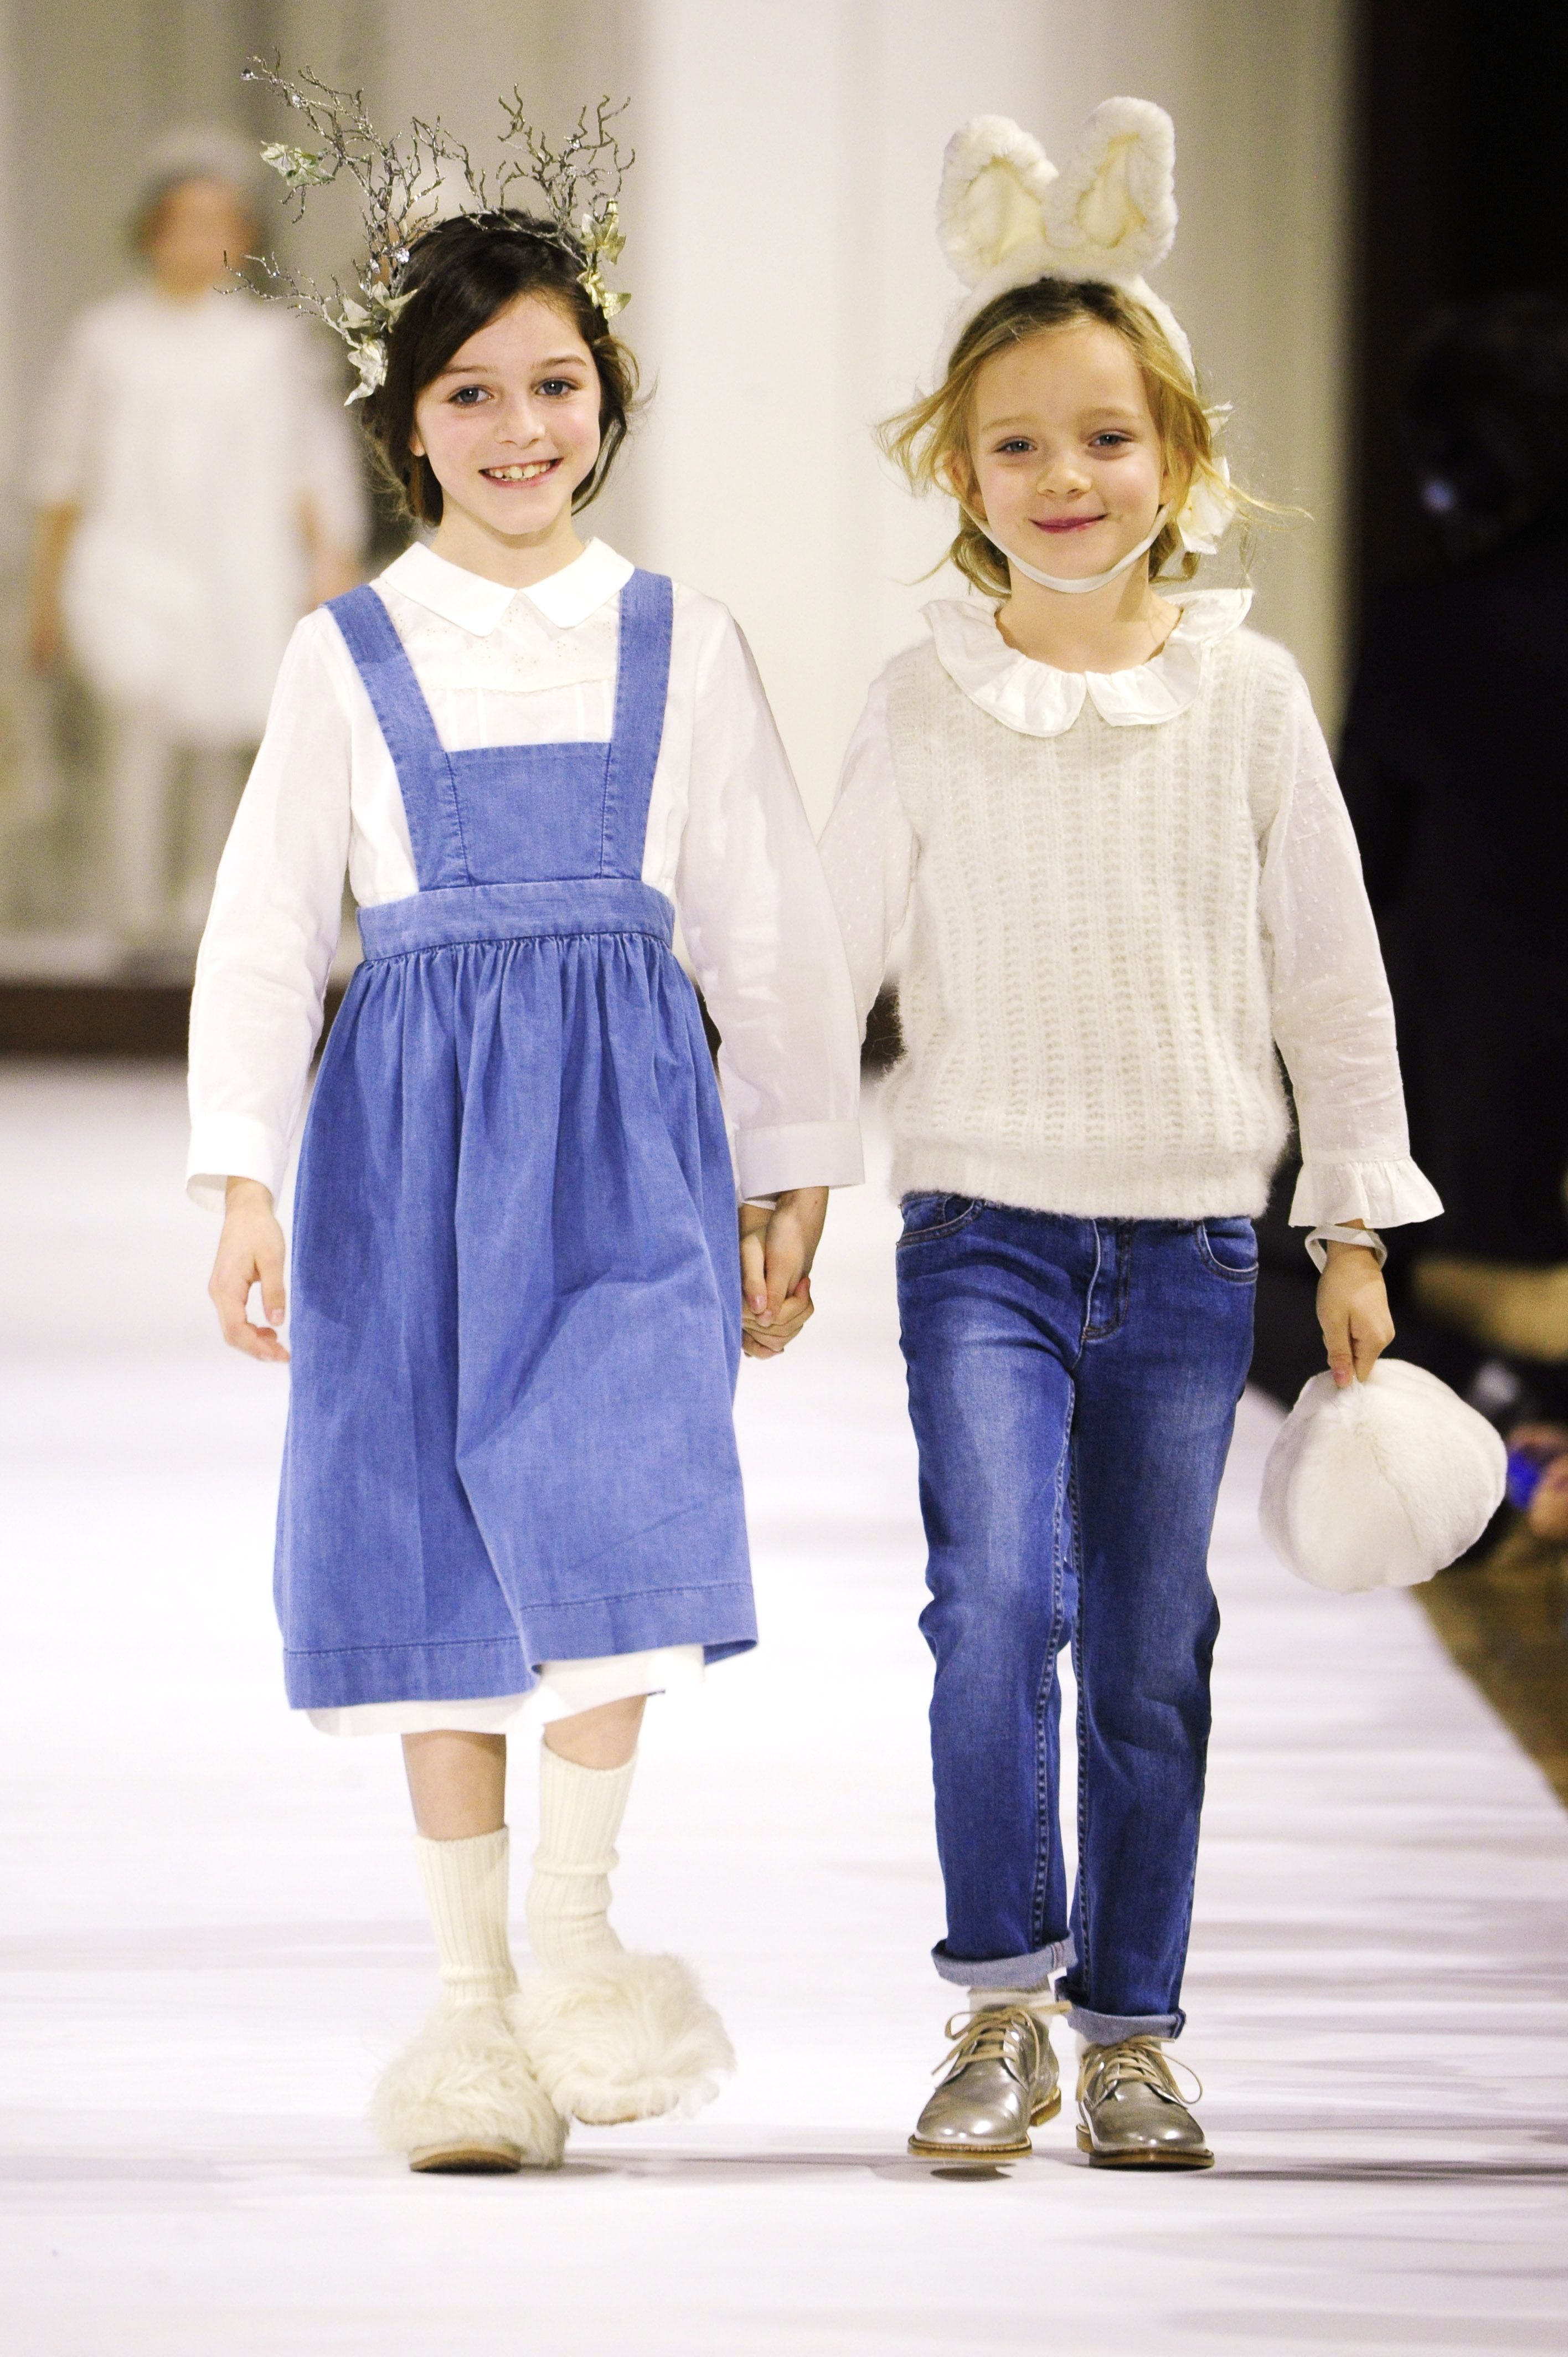 The Absurdity of Watching My 6-Year-Old Walk a Couture Show